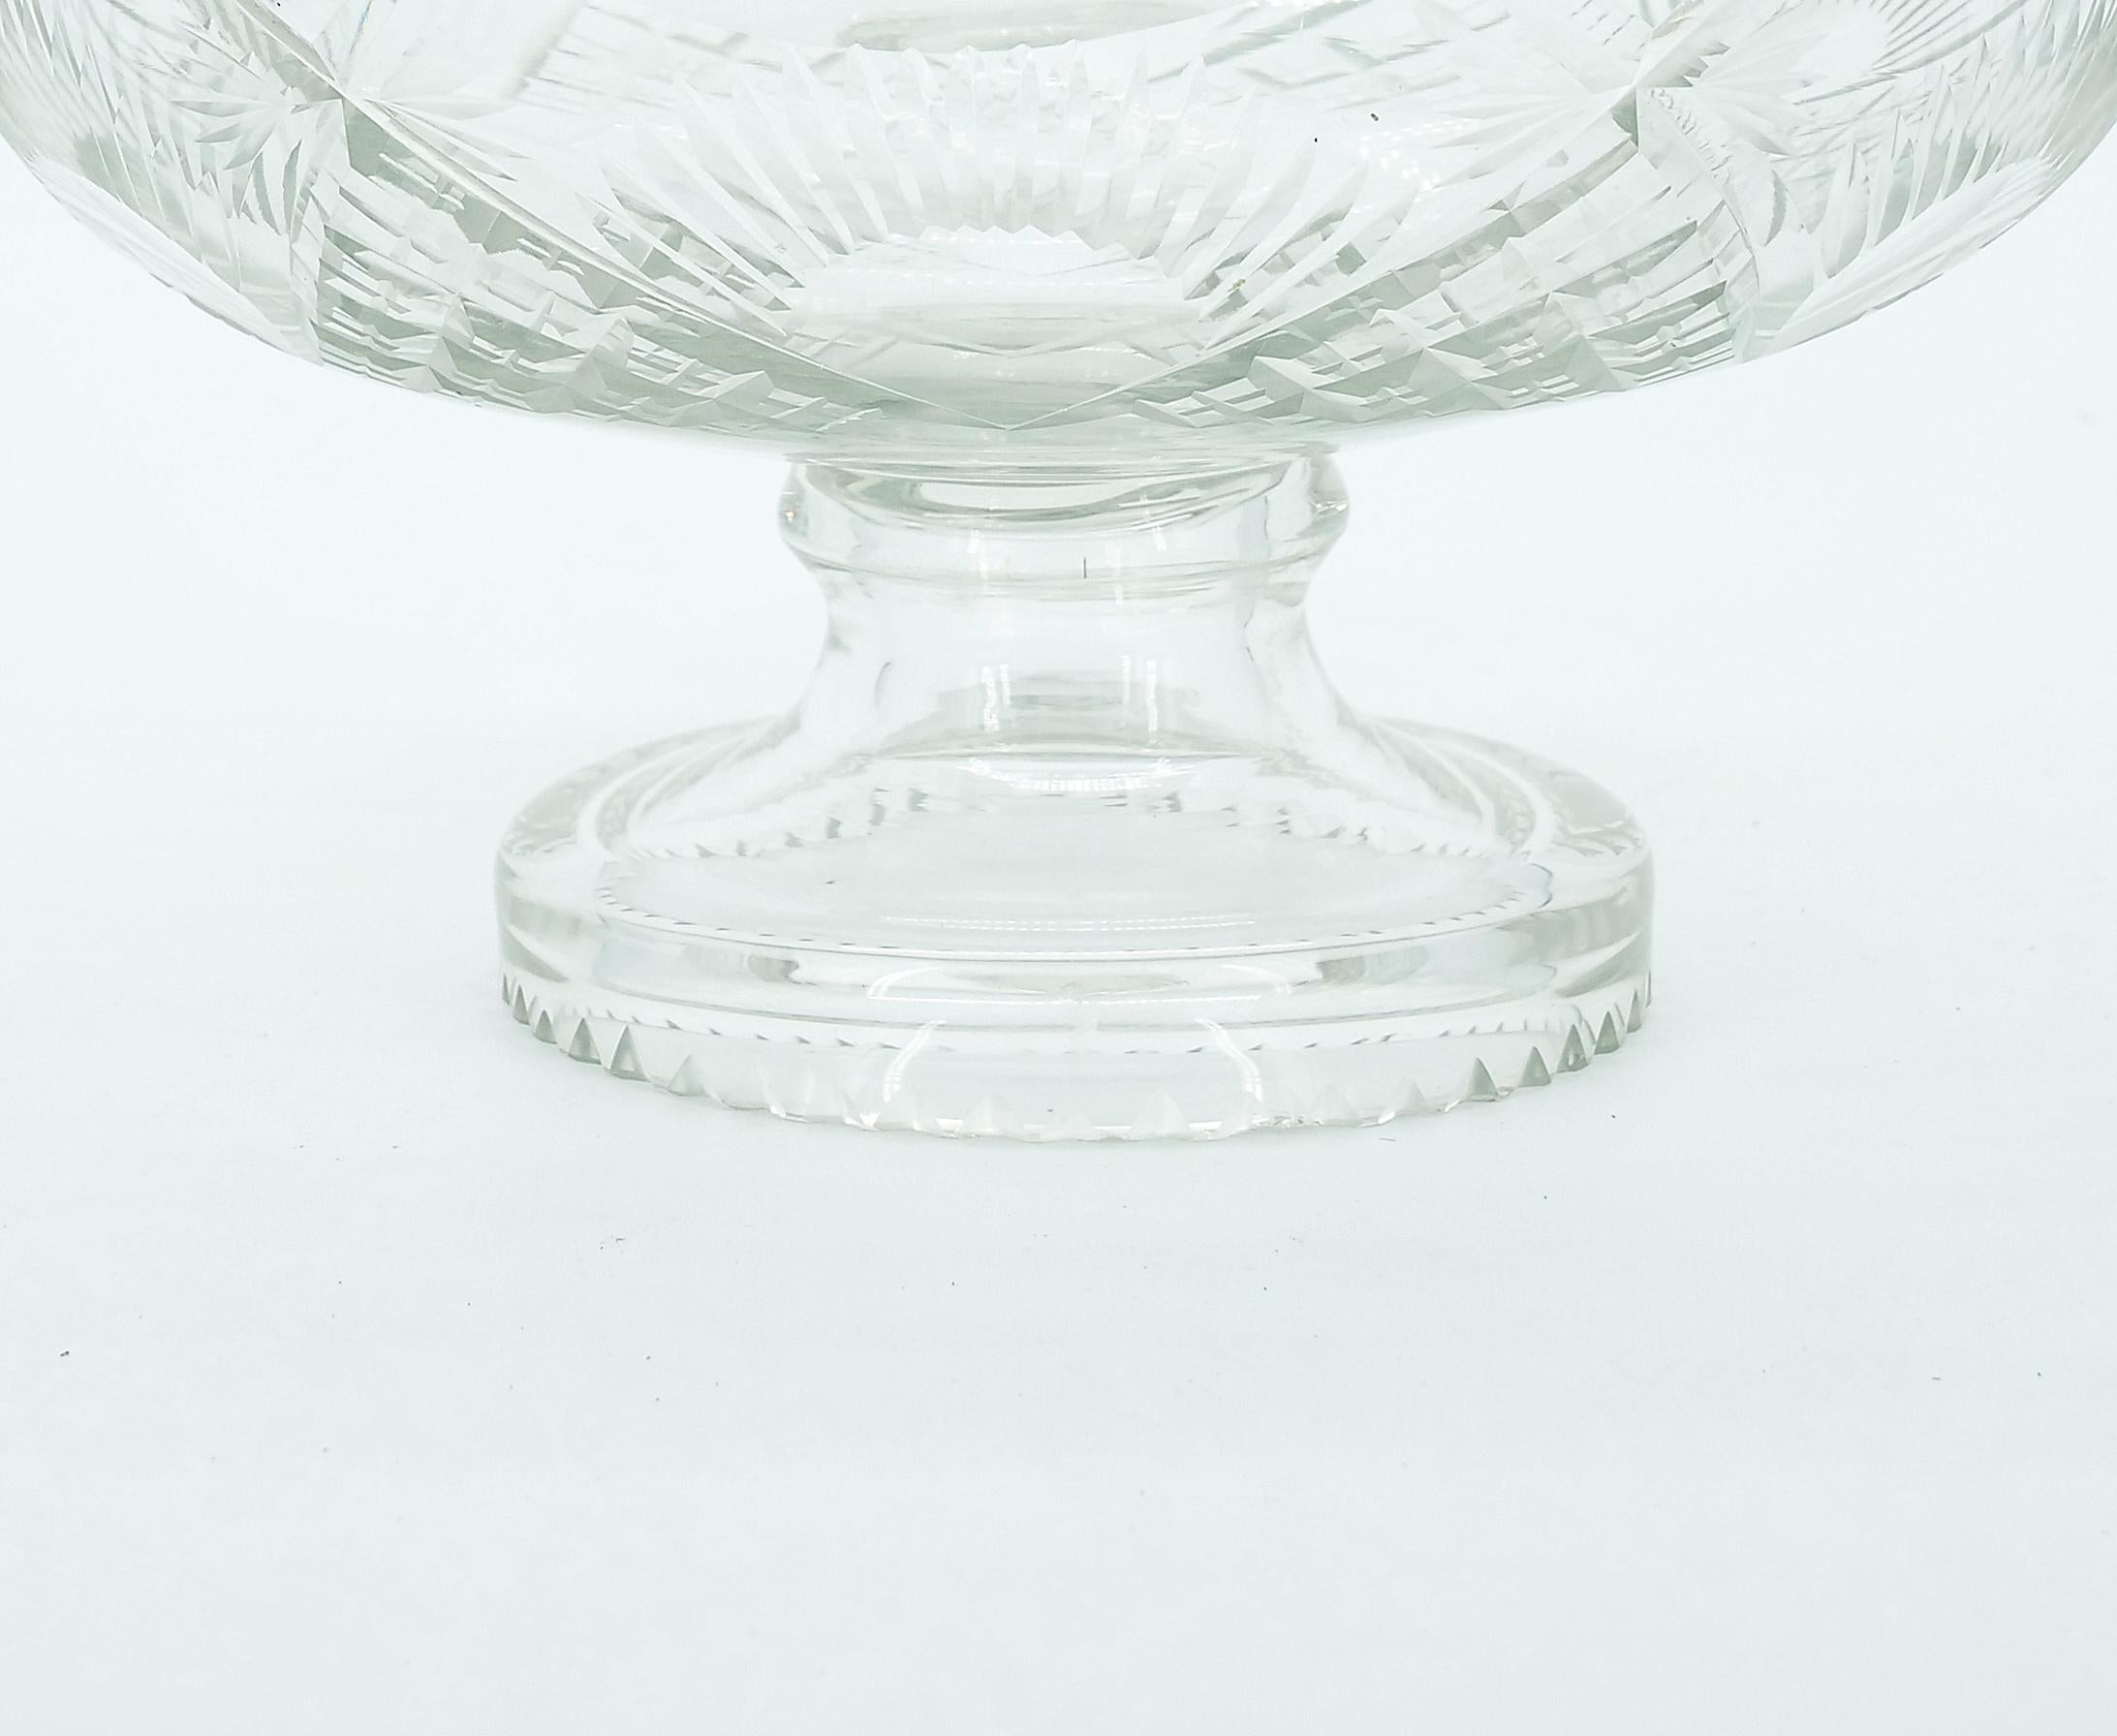 Engraved English Silver Plate Framed Top / Cut Glass Footed Serving Bowl For Sale